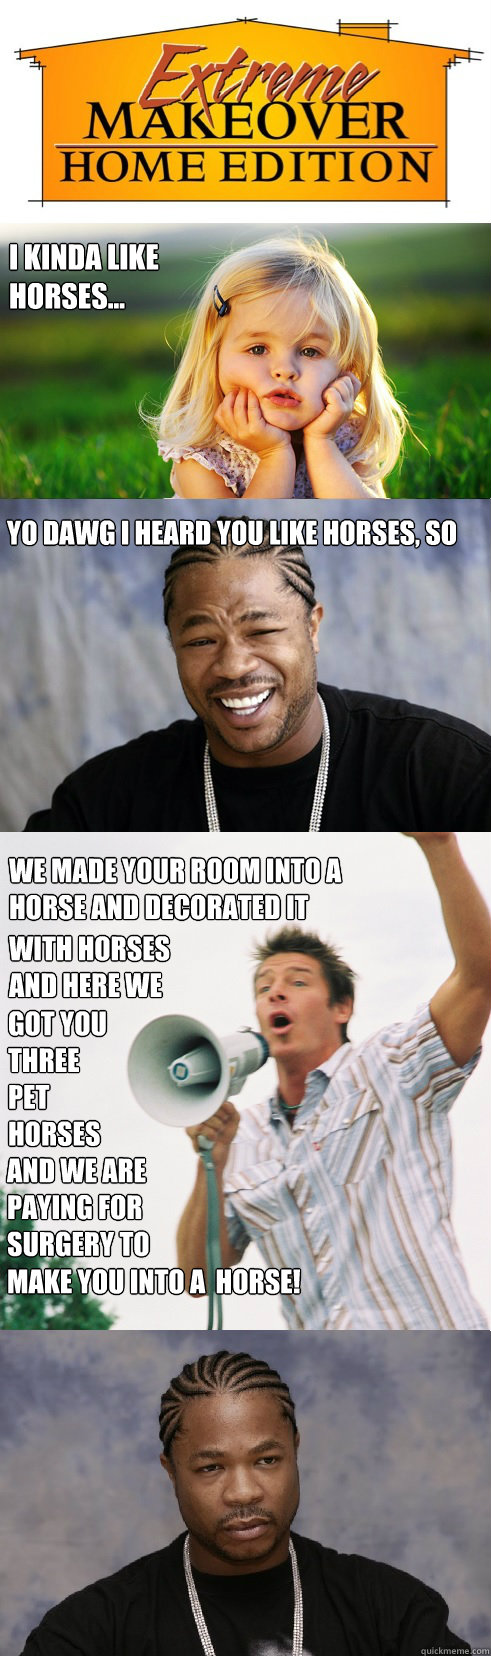 I kinda like horses... yo dawg i heard you like horses, so we made your room into a horse and decorated it with horses and here we got you three pet horses and we are paying for surgery to make you into a  horse! make you into a  horse!  Extreme Takeover